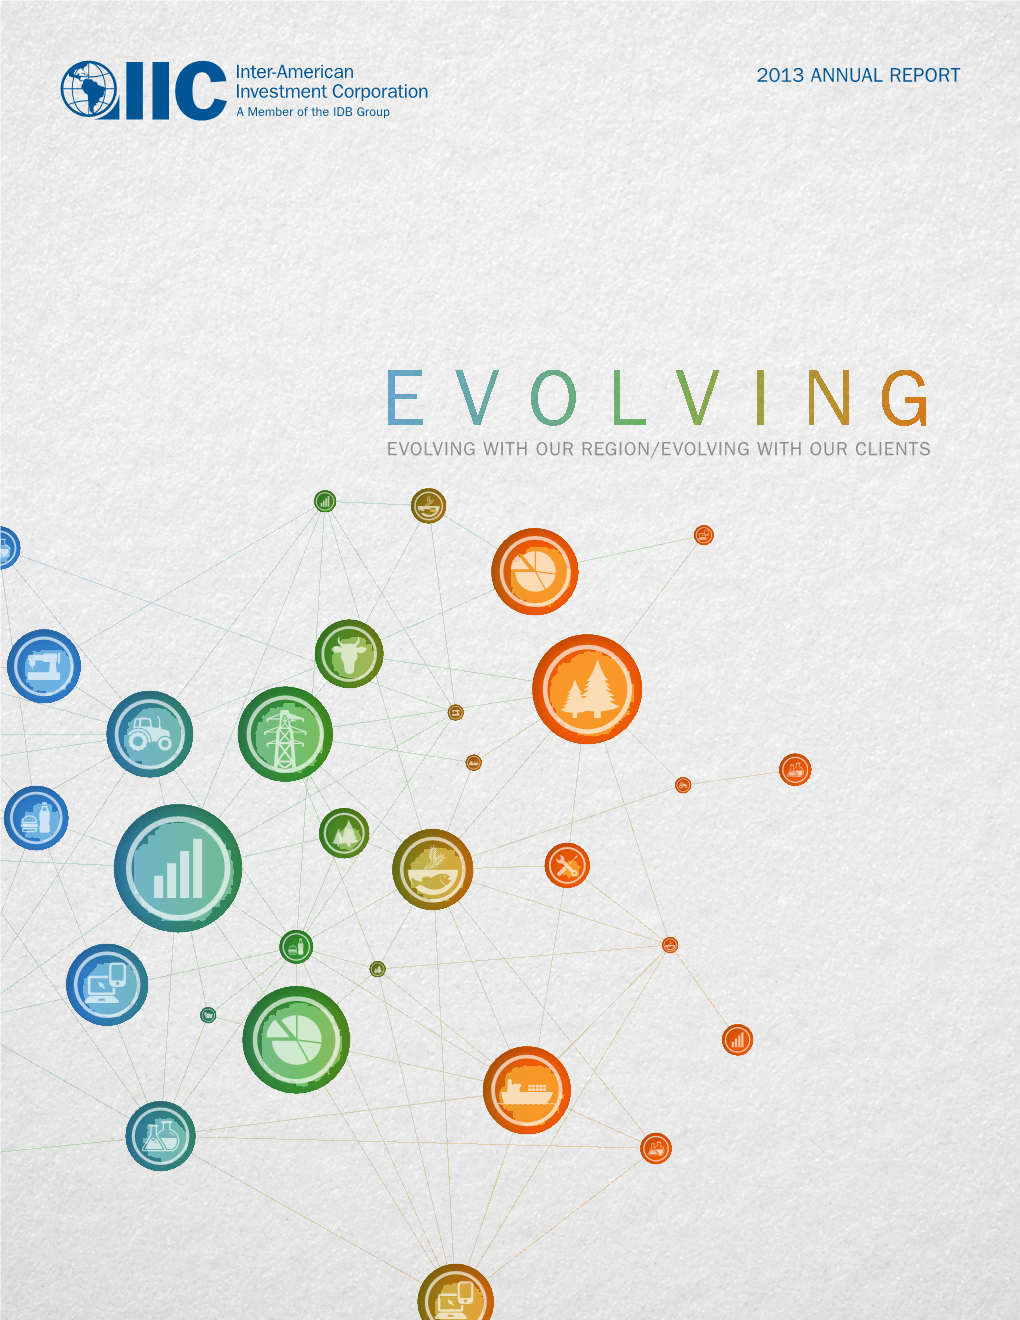 Evolving Evolving with Our Region/Evolving with Our Clients